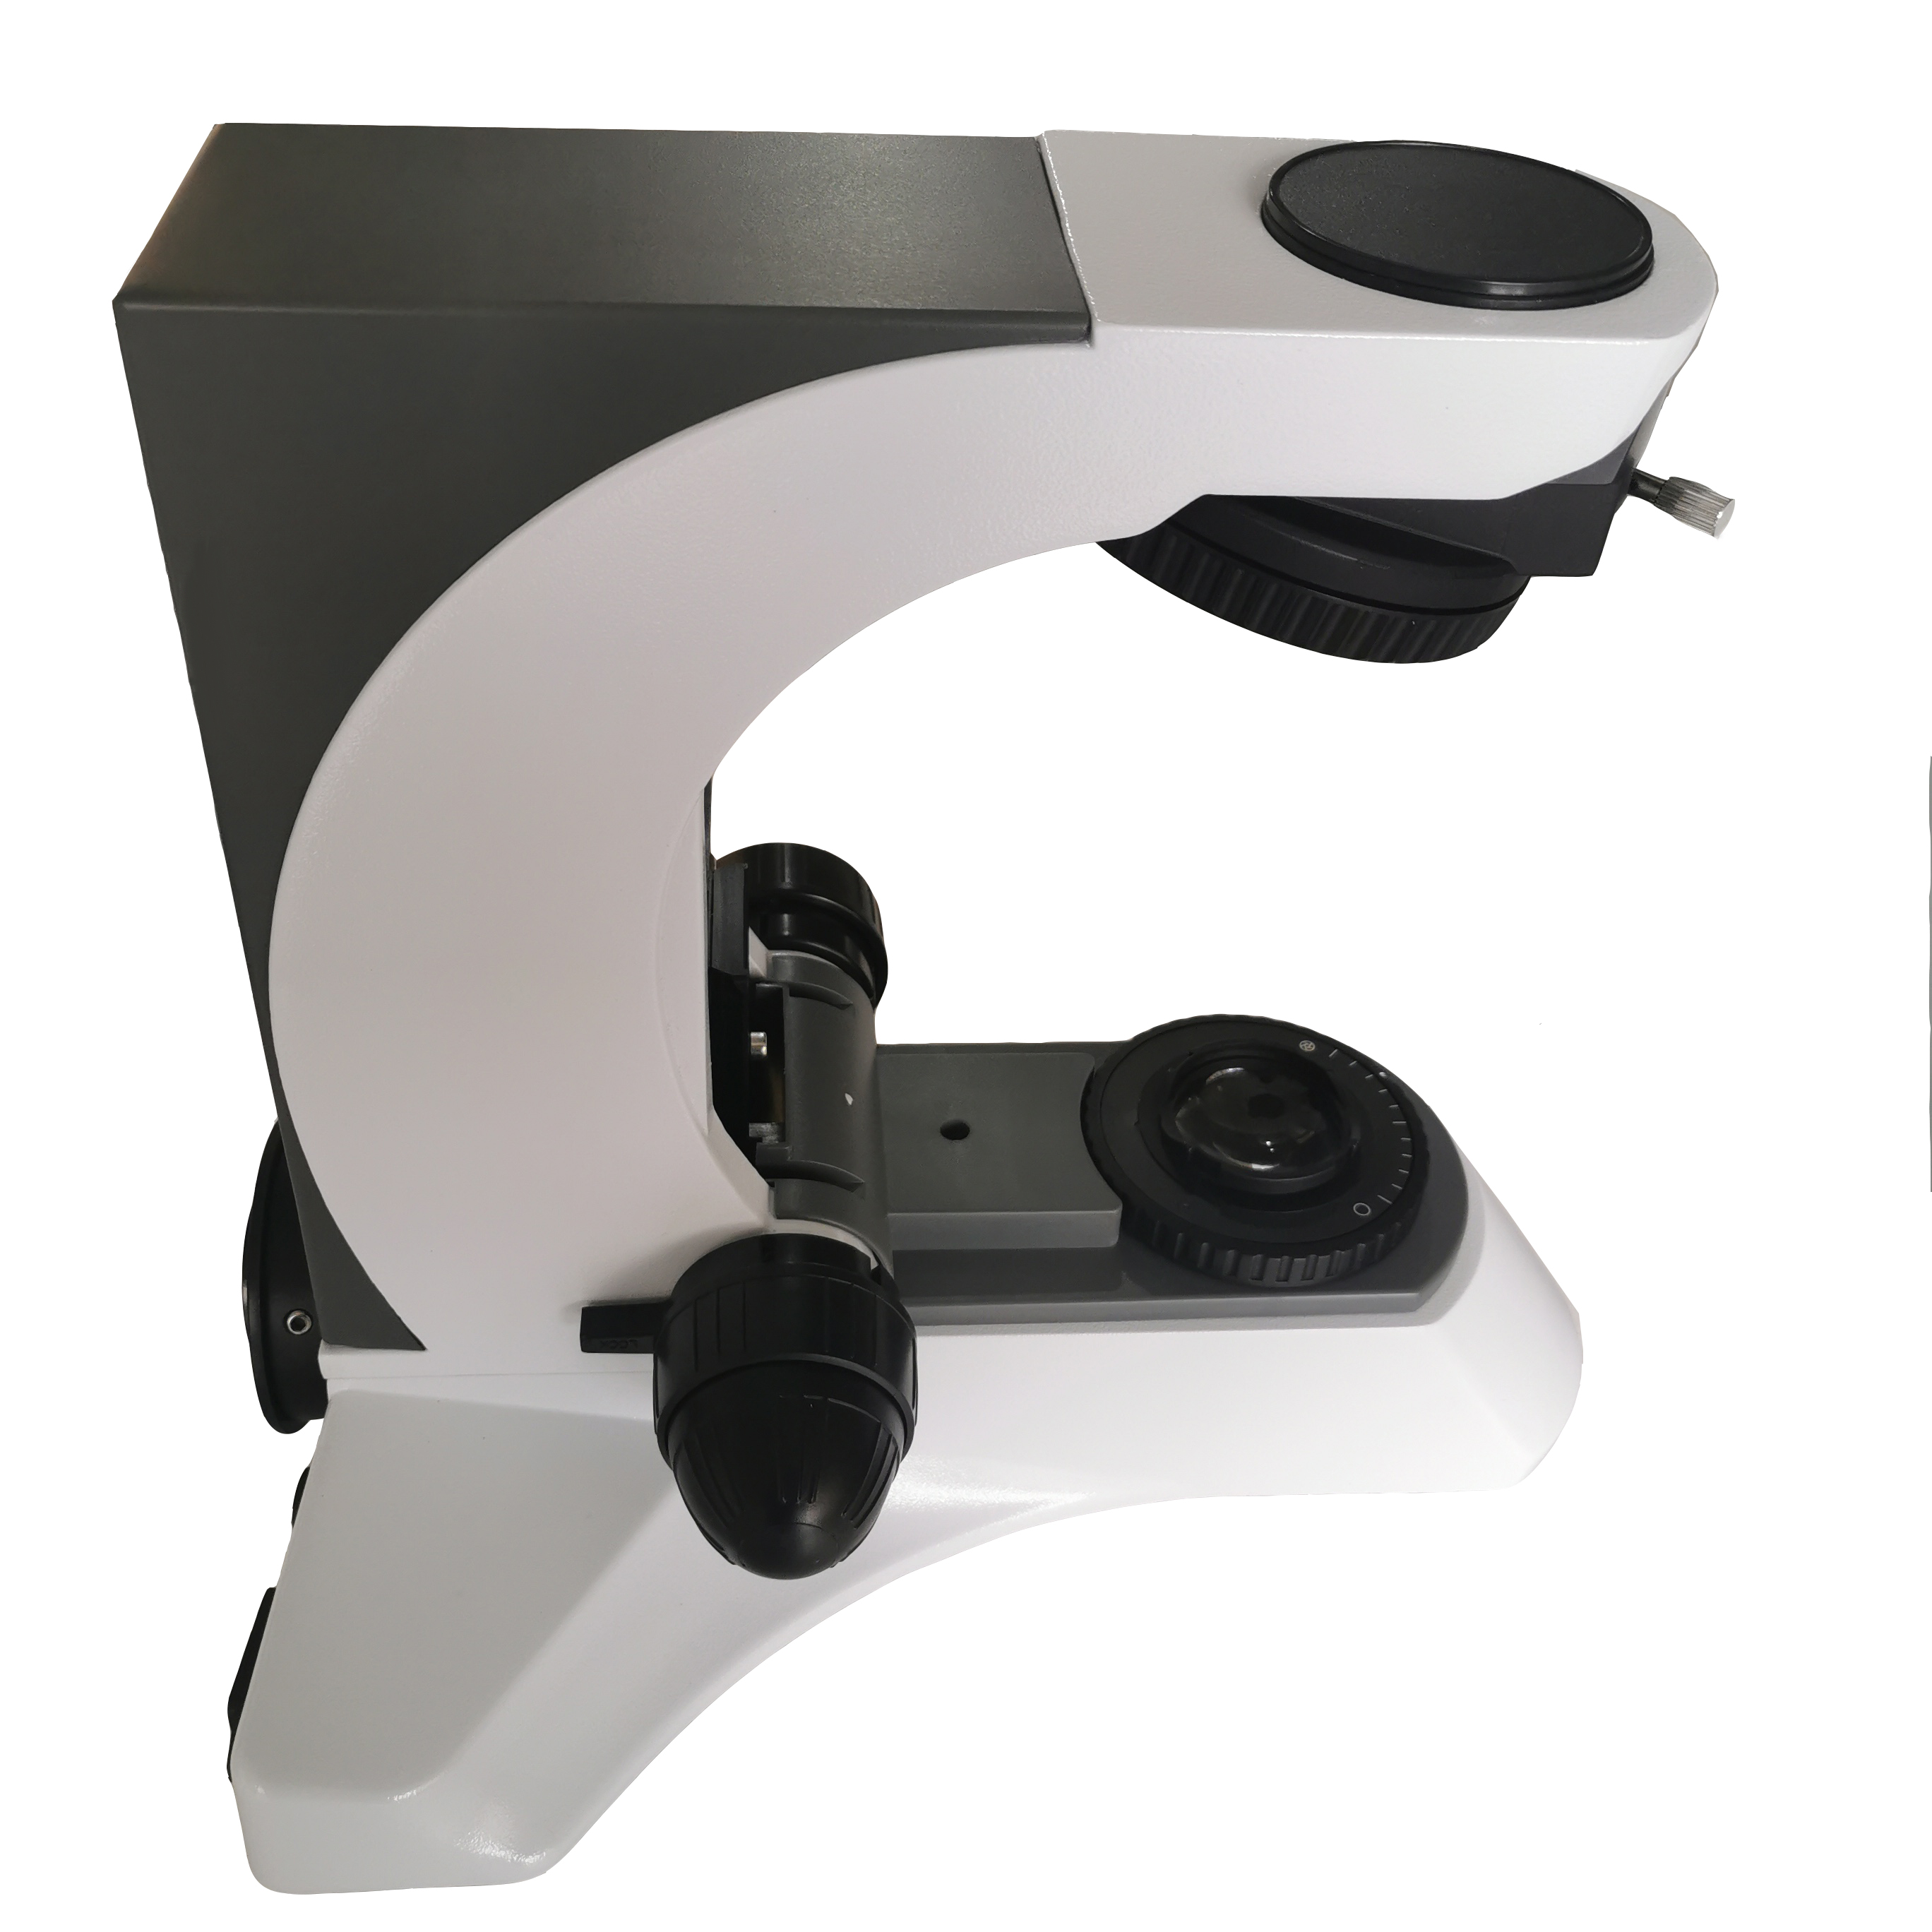 Nade Lab Optical Instrument Digital and USB Metallurgical Microscope NMM-800TRF